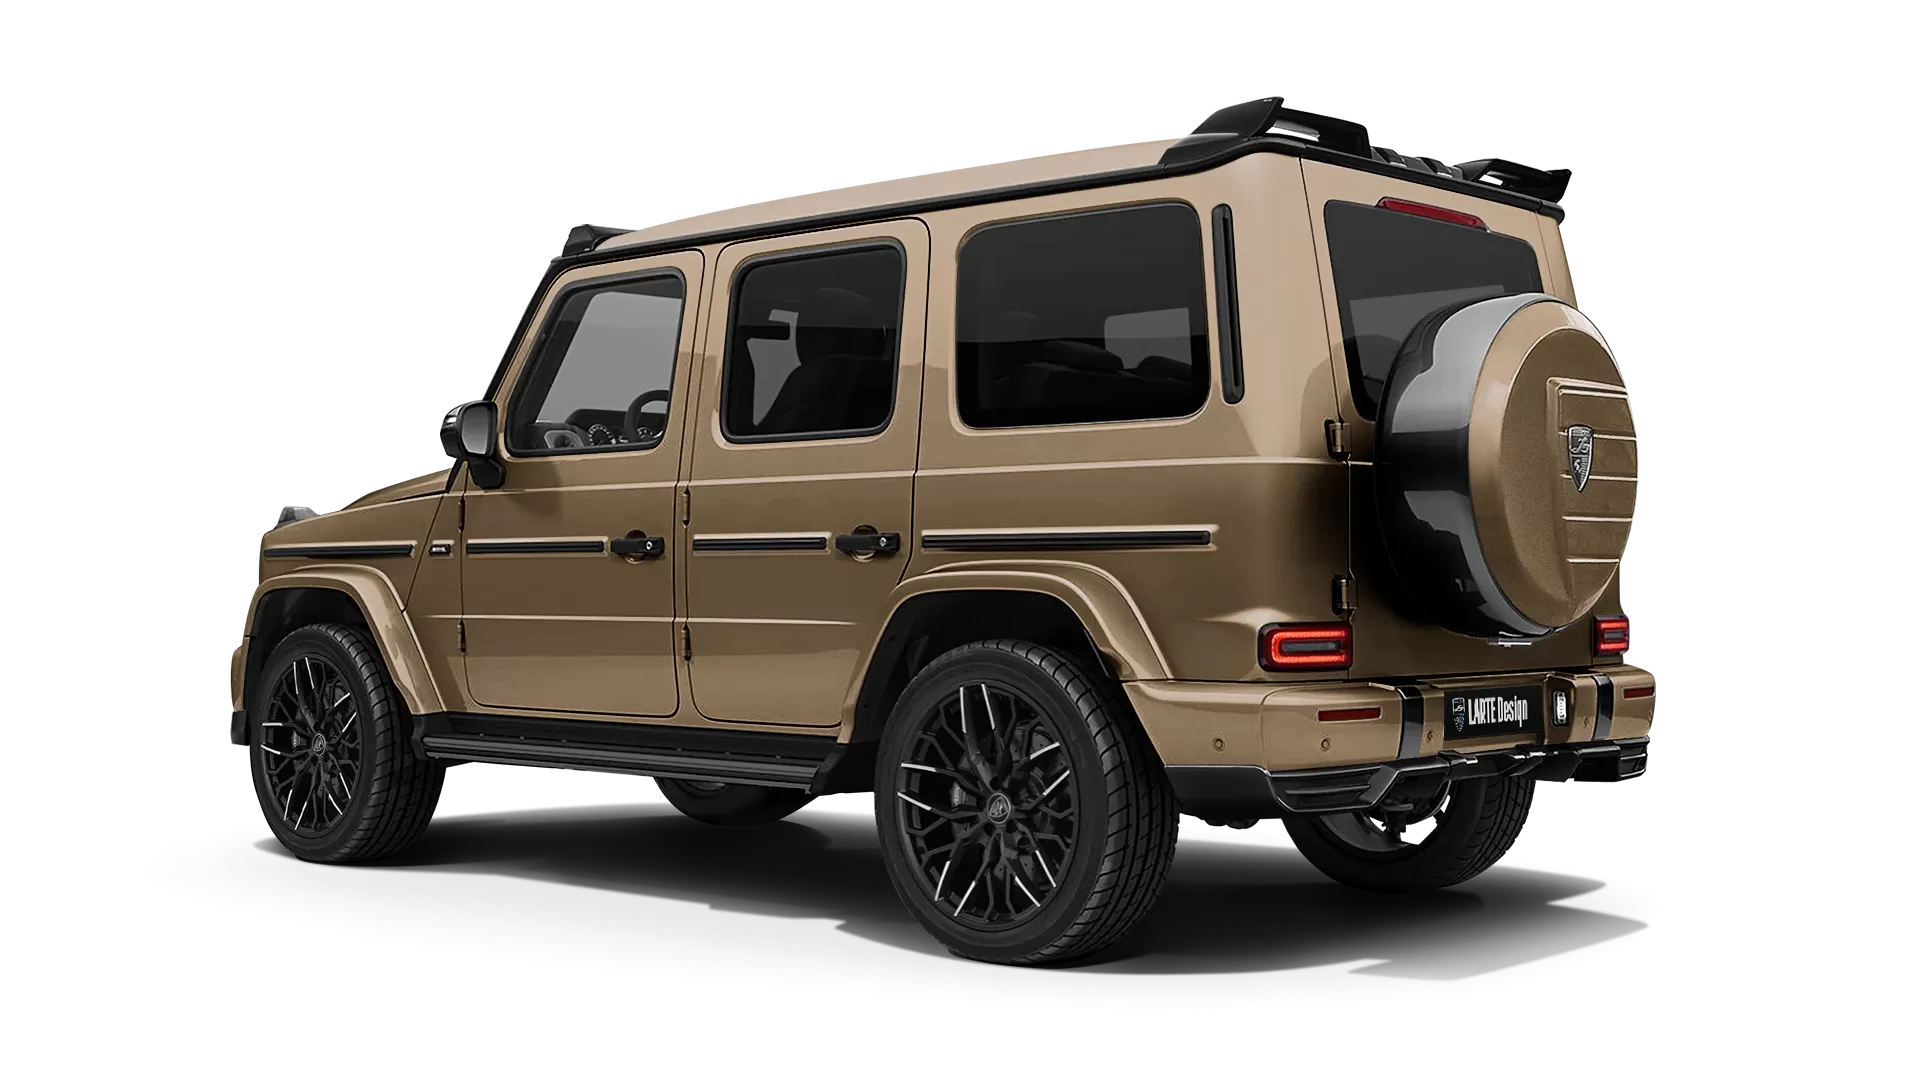 Mercedes G class W463 with painted body kit: rear view shown in Desert Sand